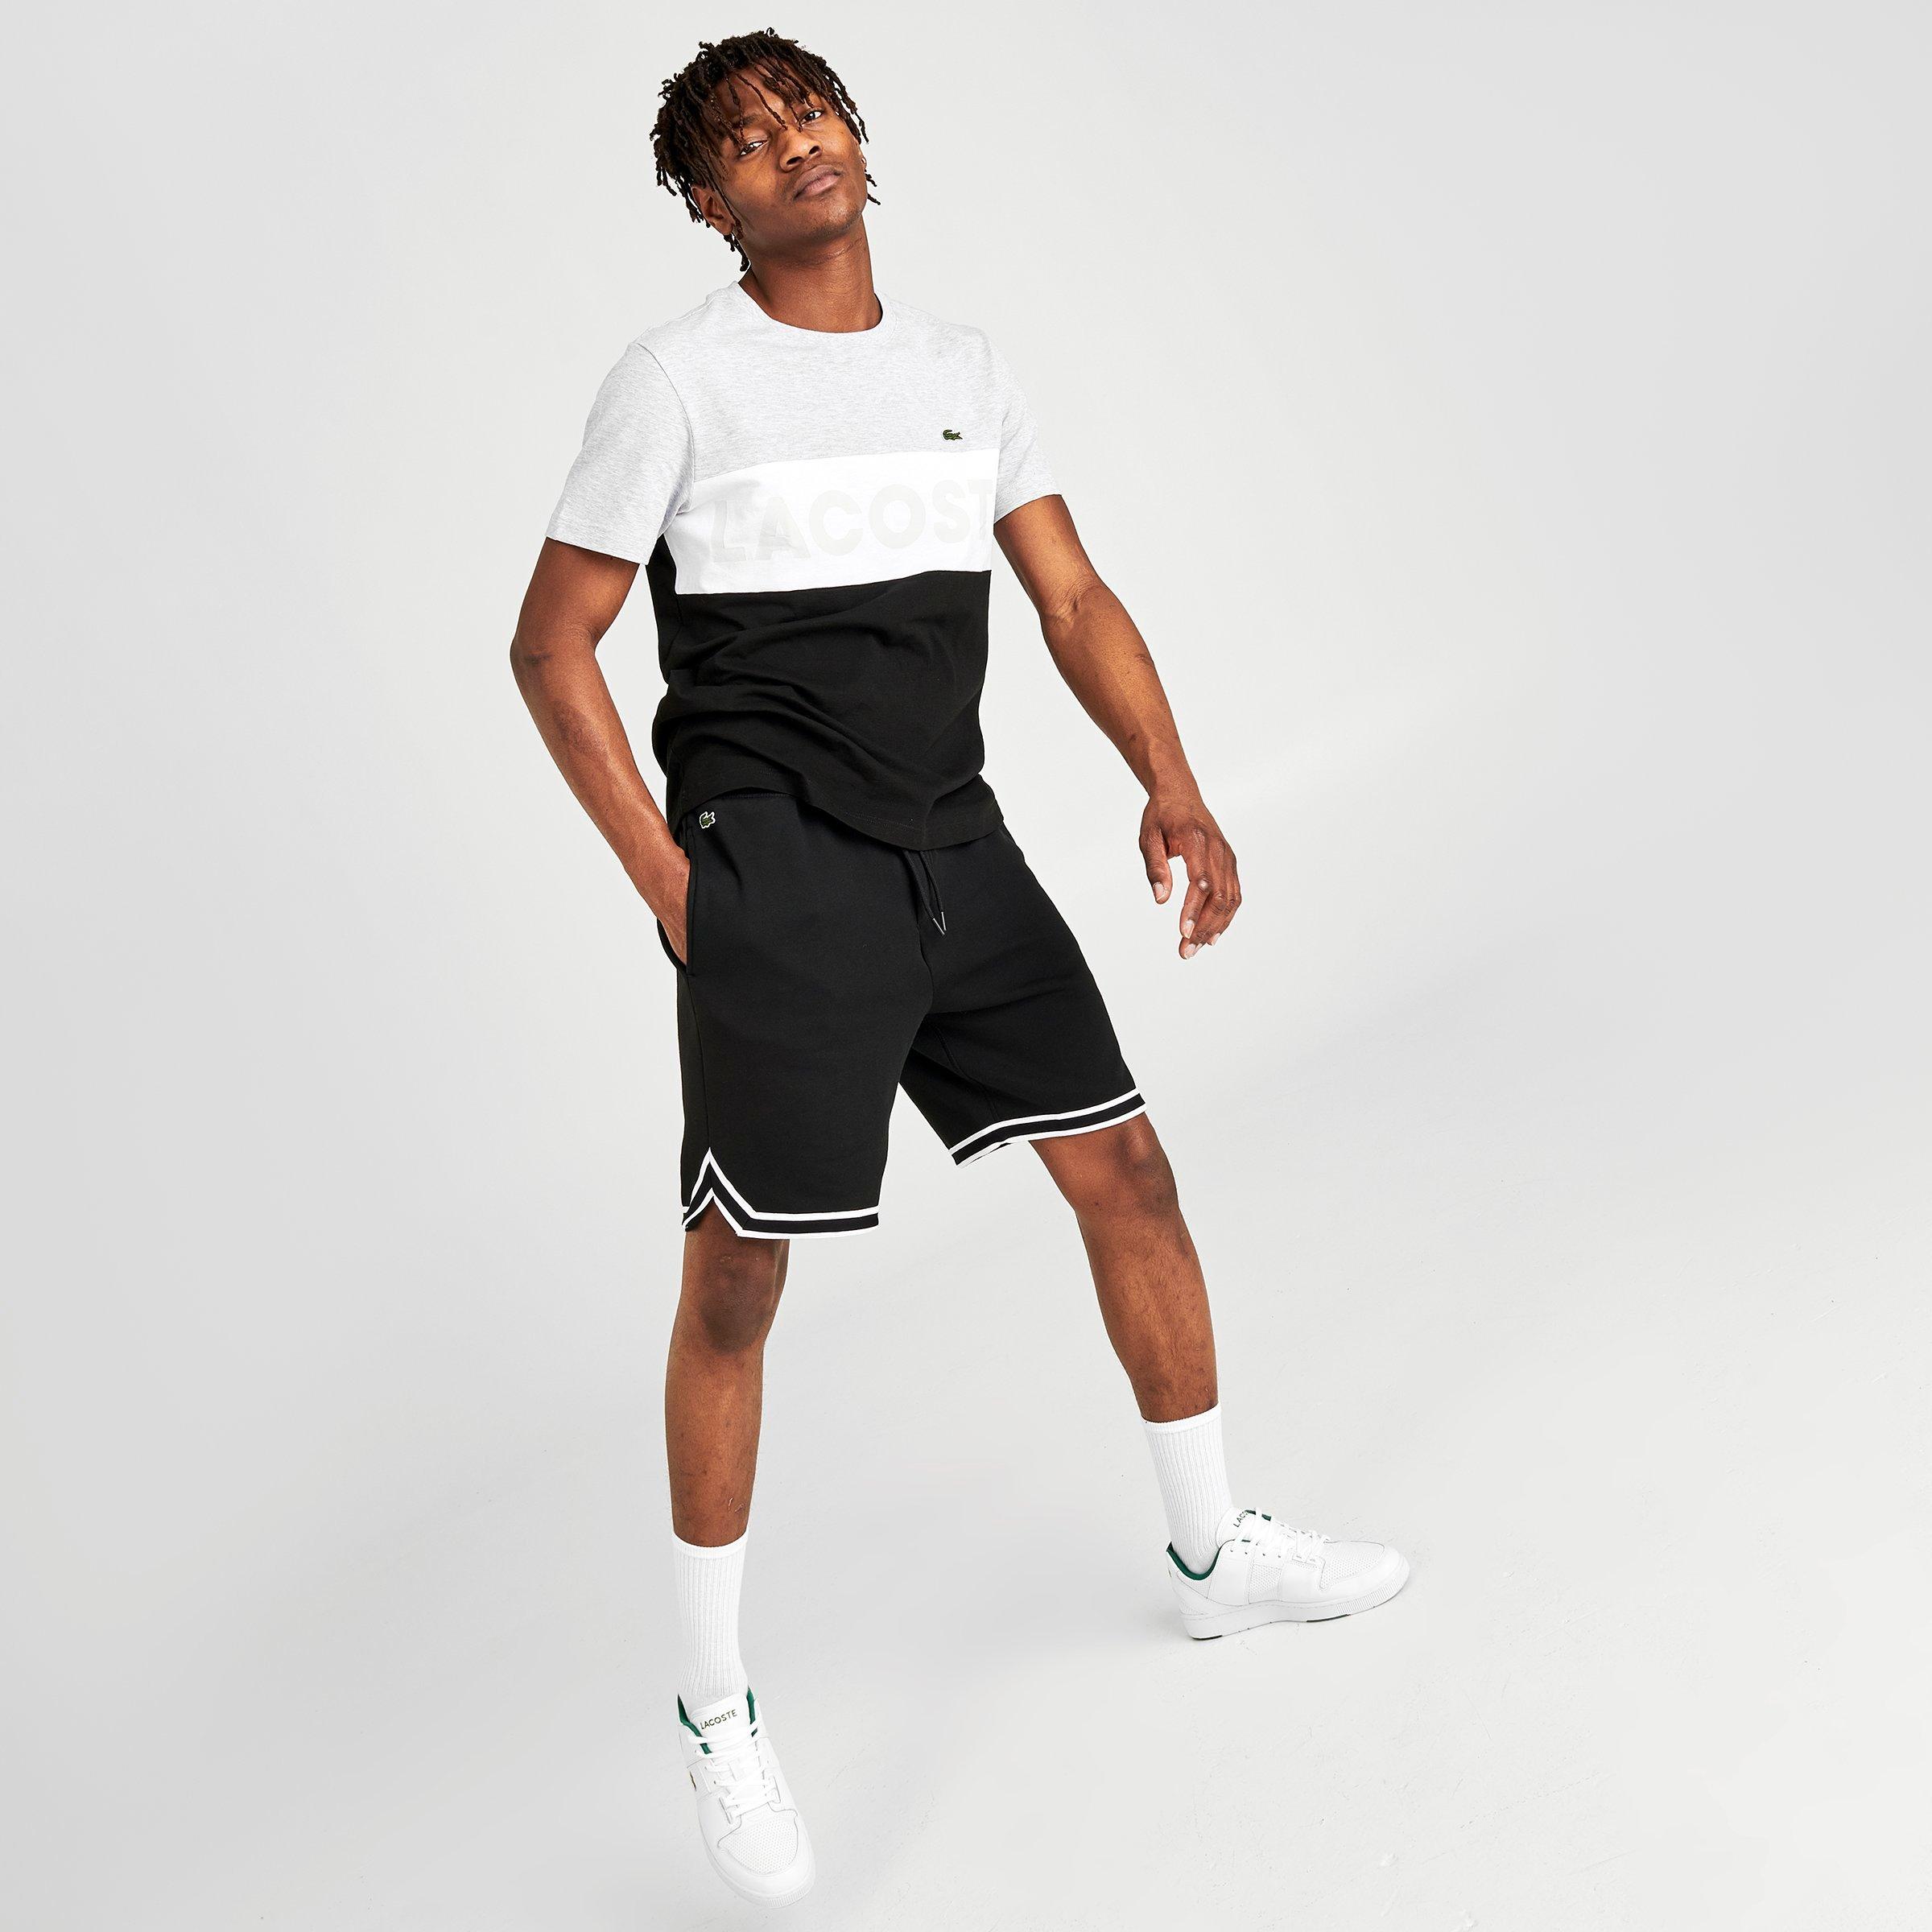 lacoste shorts jd off 74% - online-sms.in